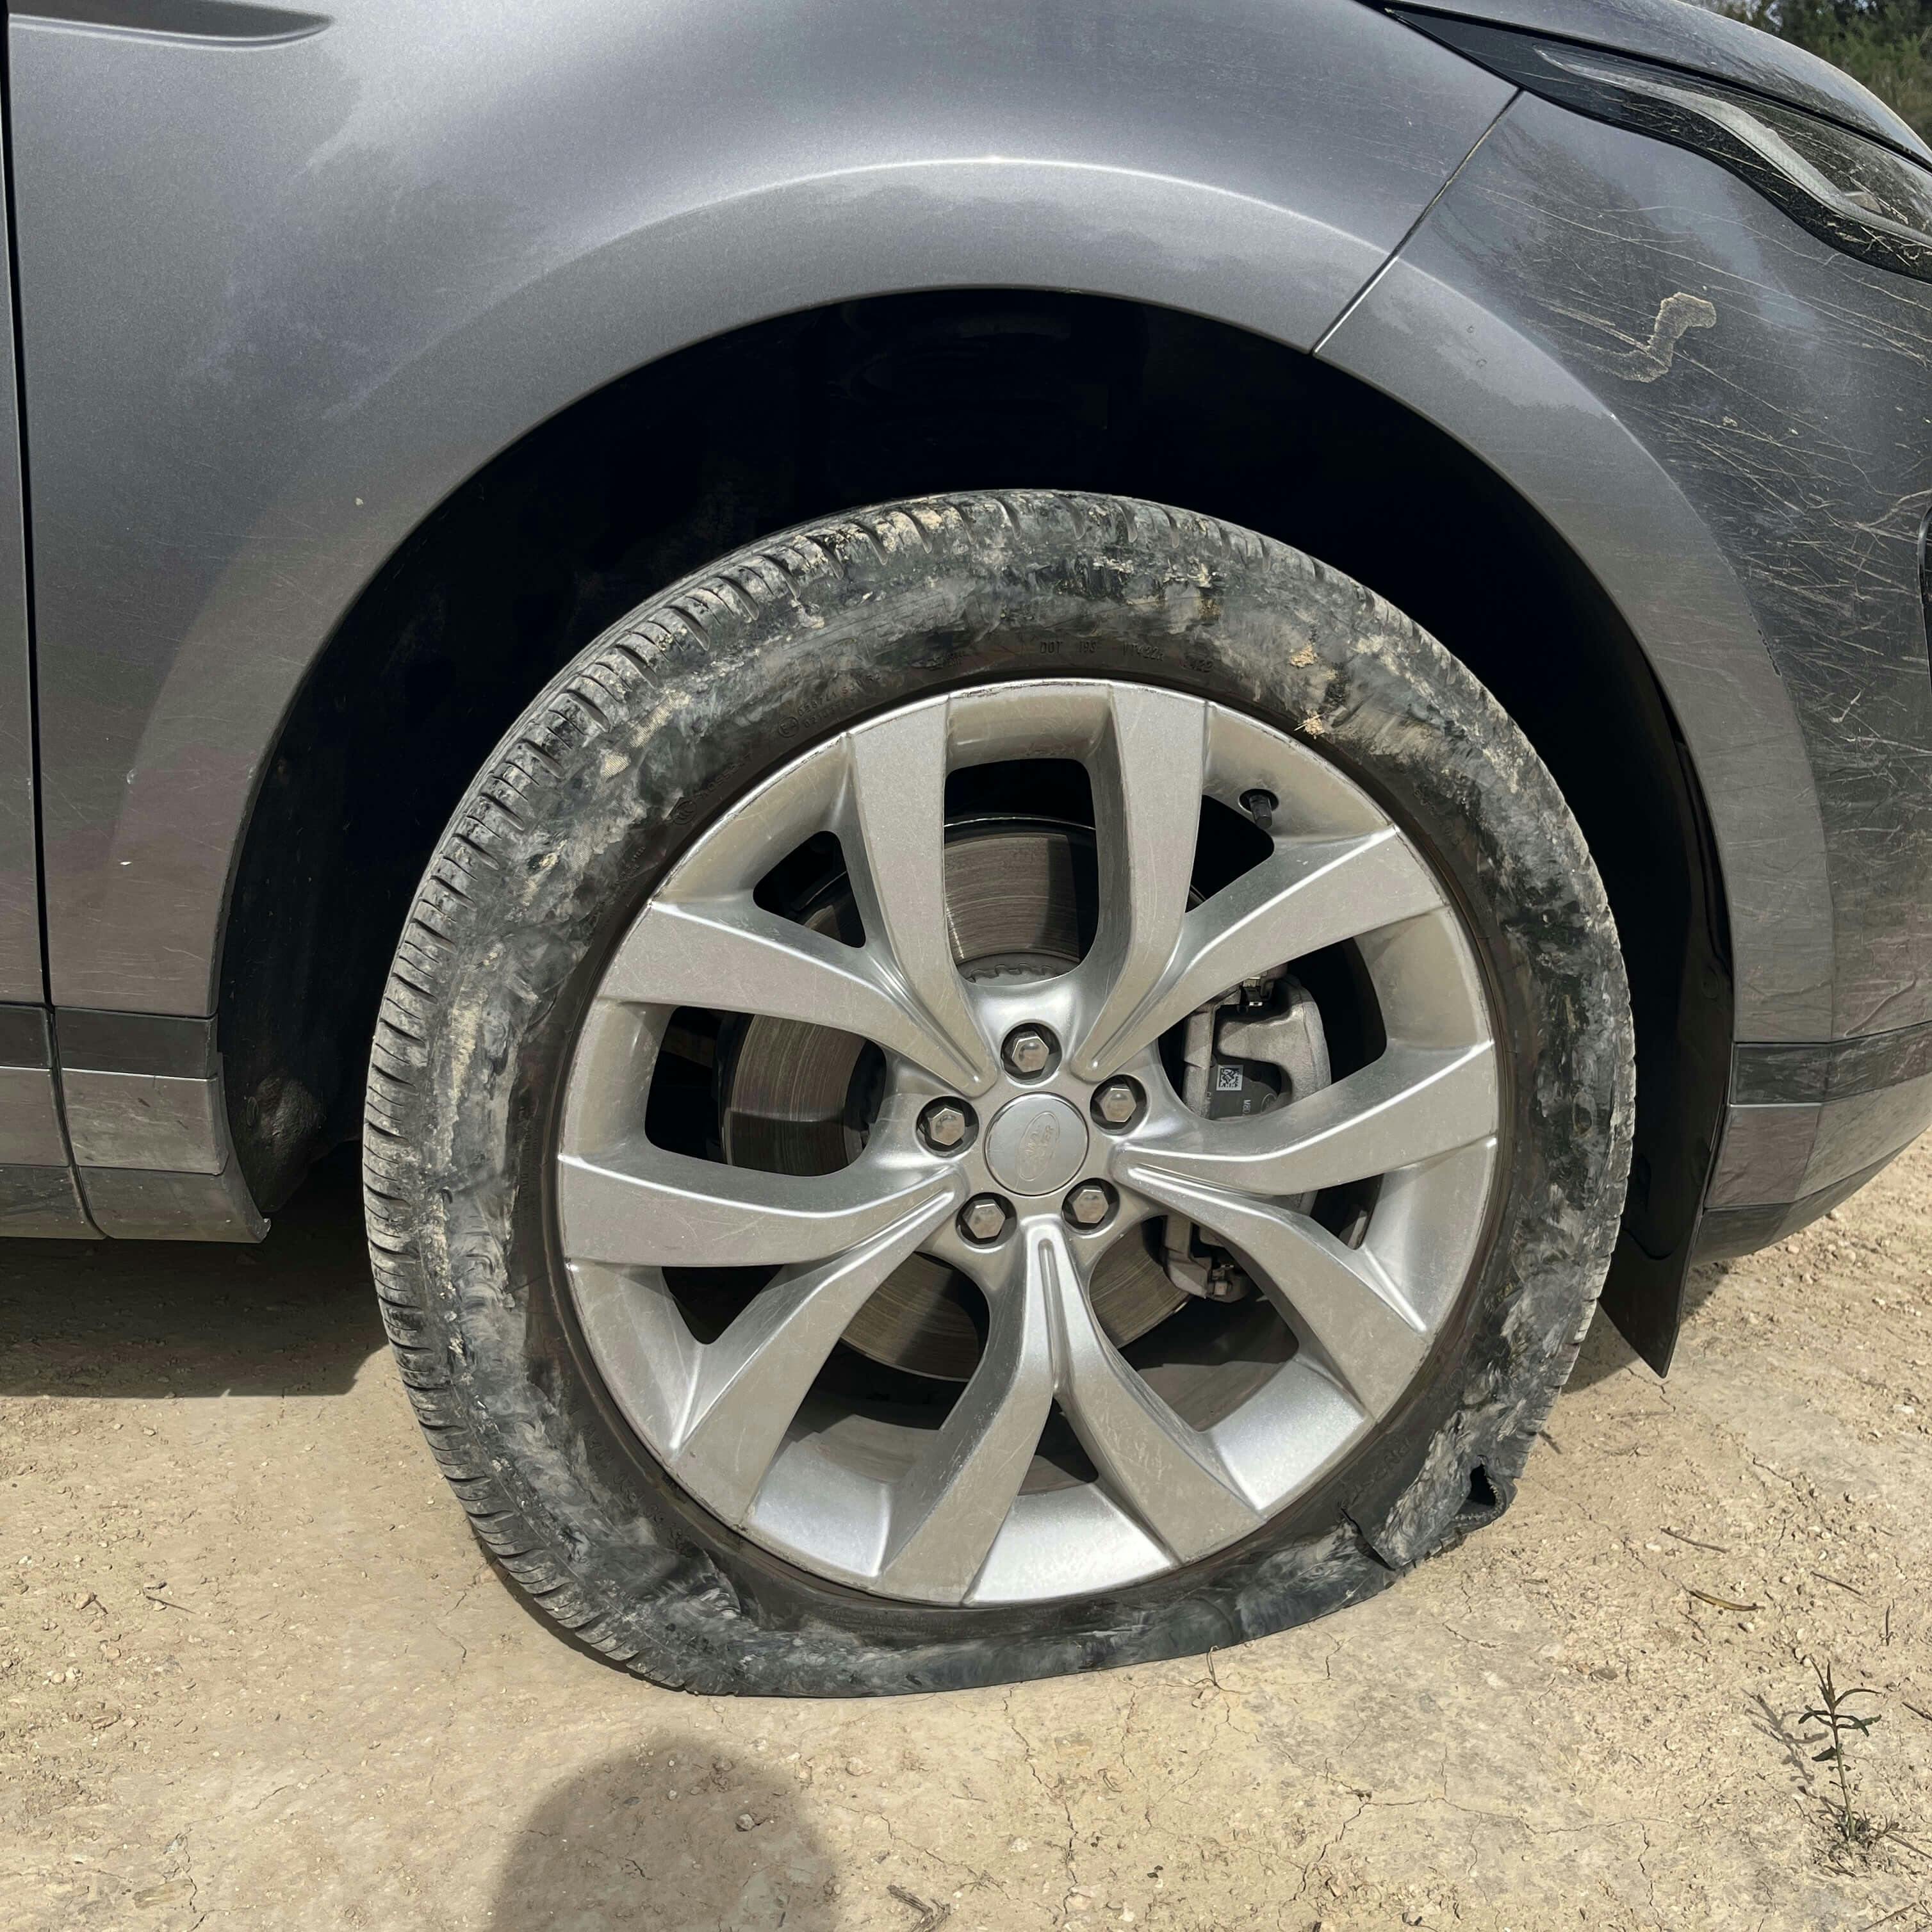 The flat tire on my rental-Range Rover, with a giant tear in it.